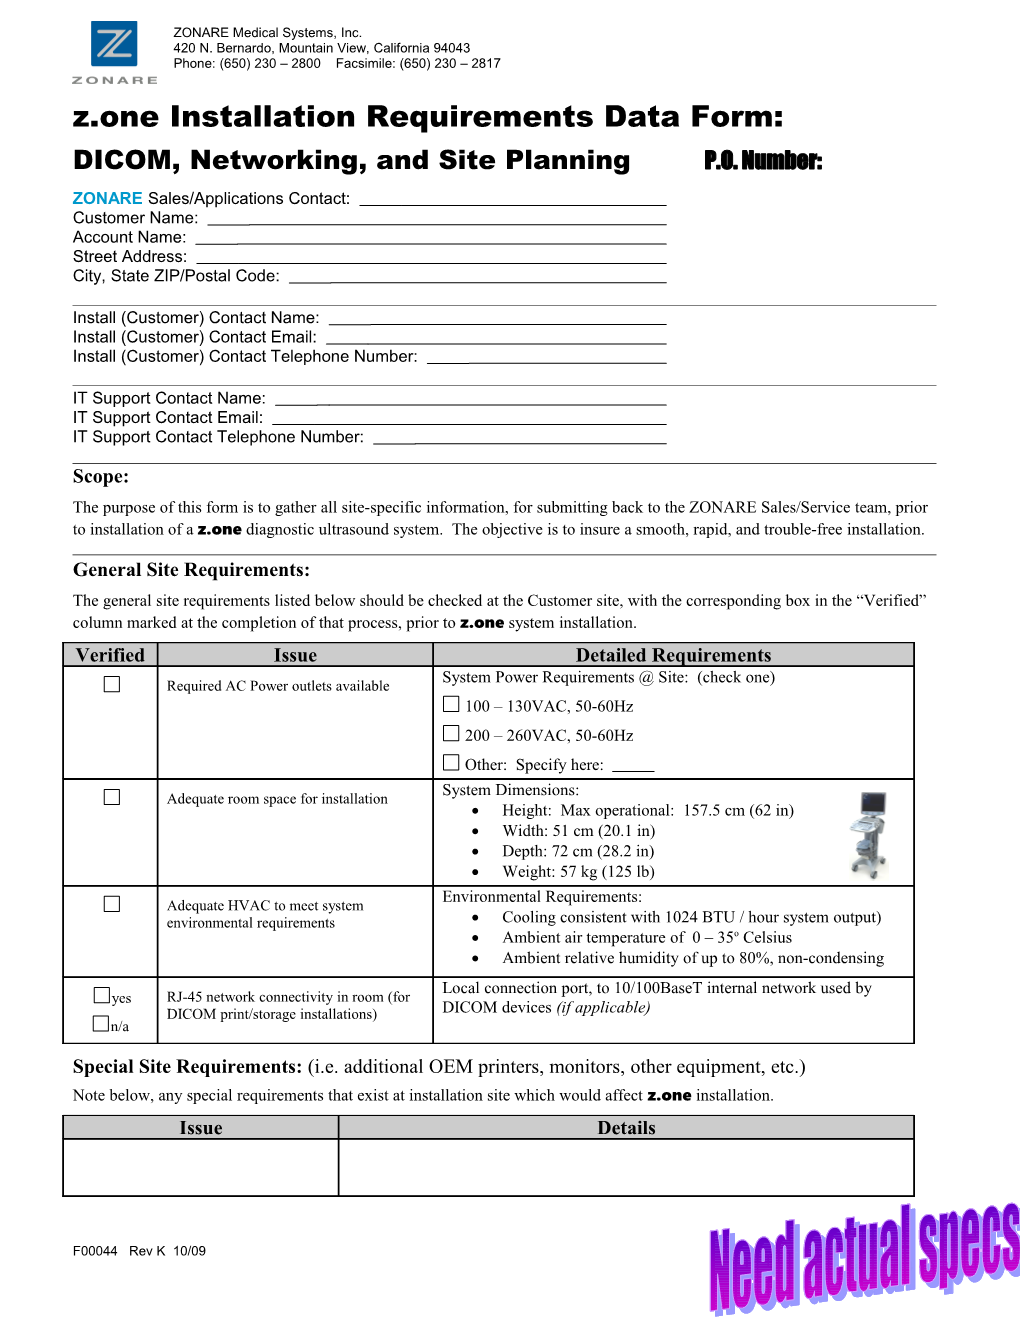 Z.One Installation Requirements Data Form